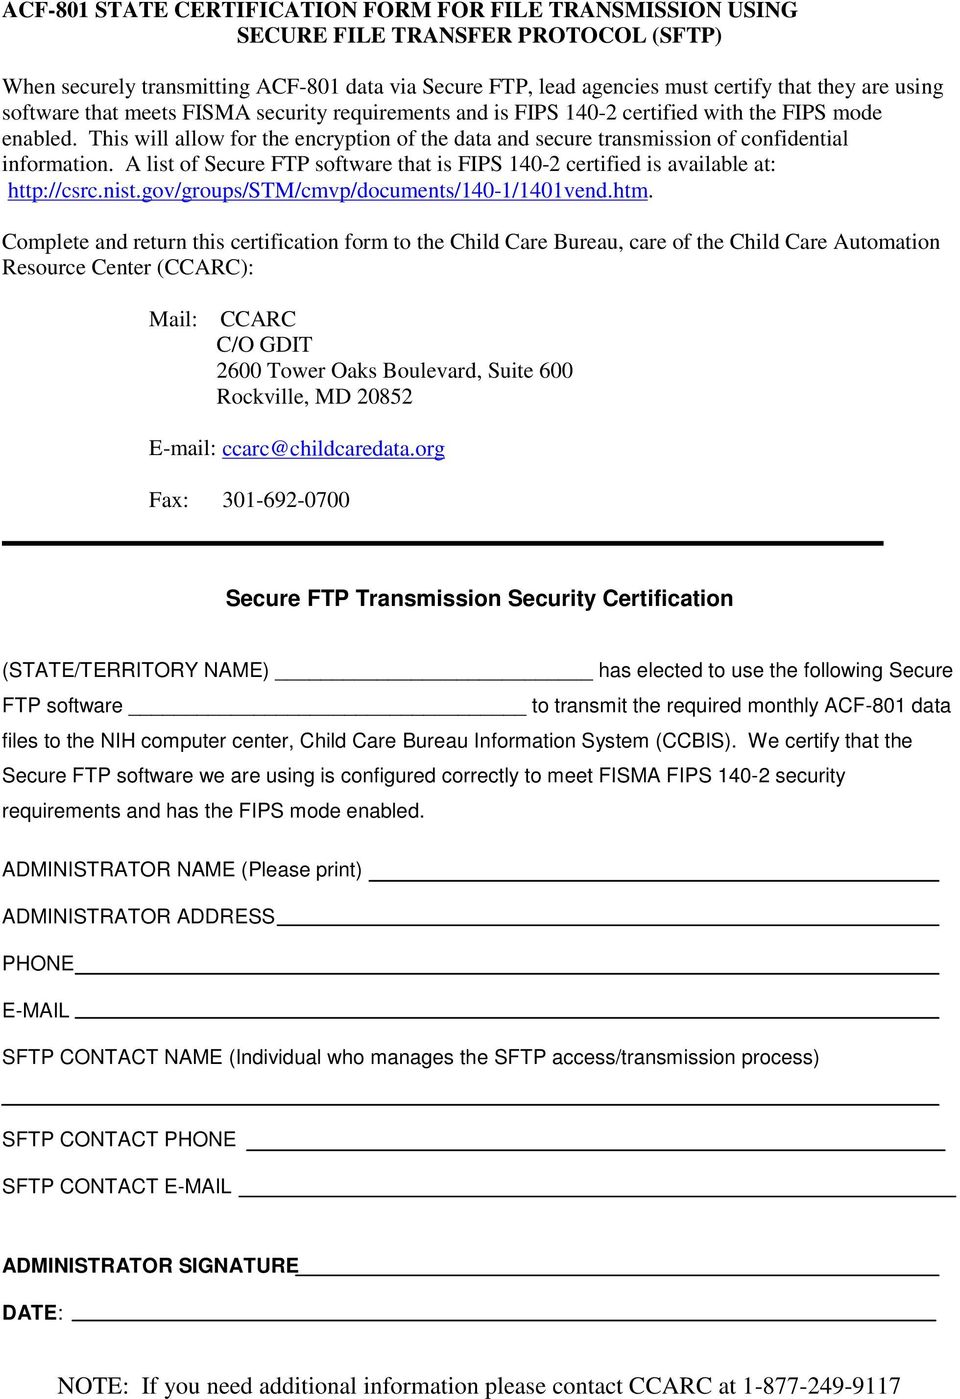 This will allow for the encryption of the data and secure transmission of confidential information. A list of Secure FTP software that is FIPS 140-2 certified is available at: http://csrc.nist.